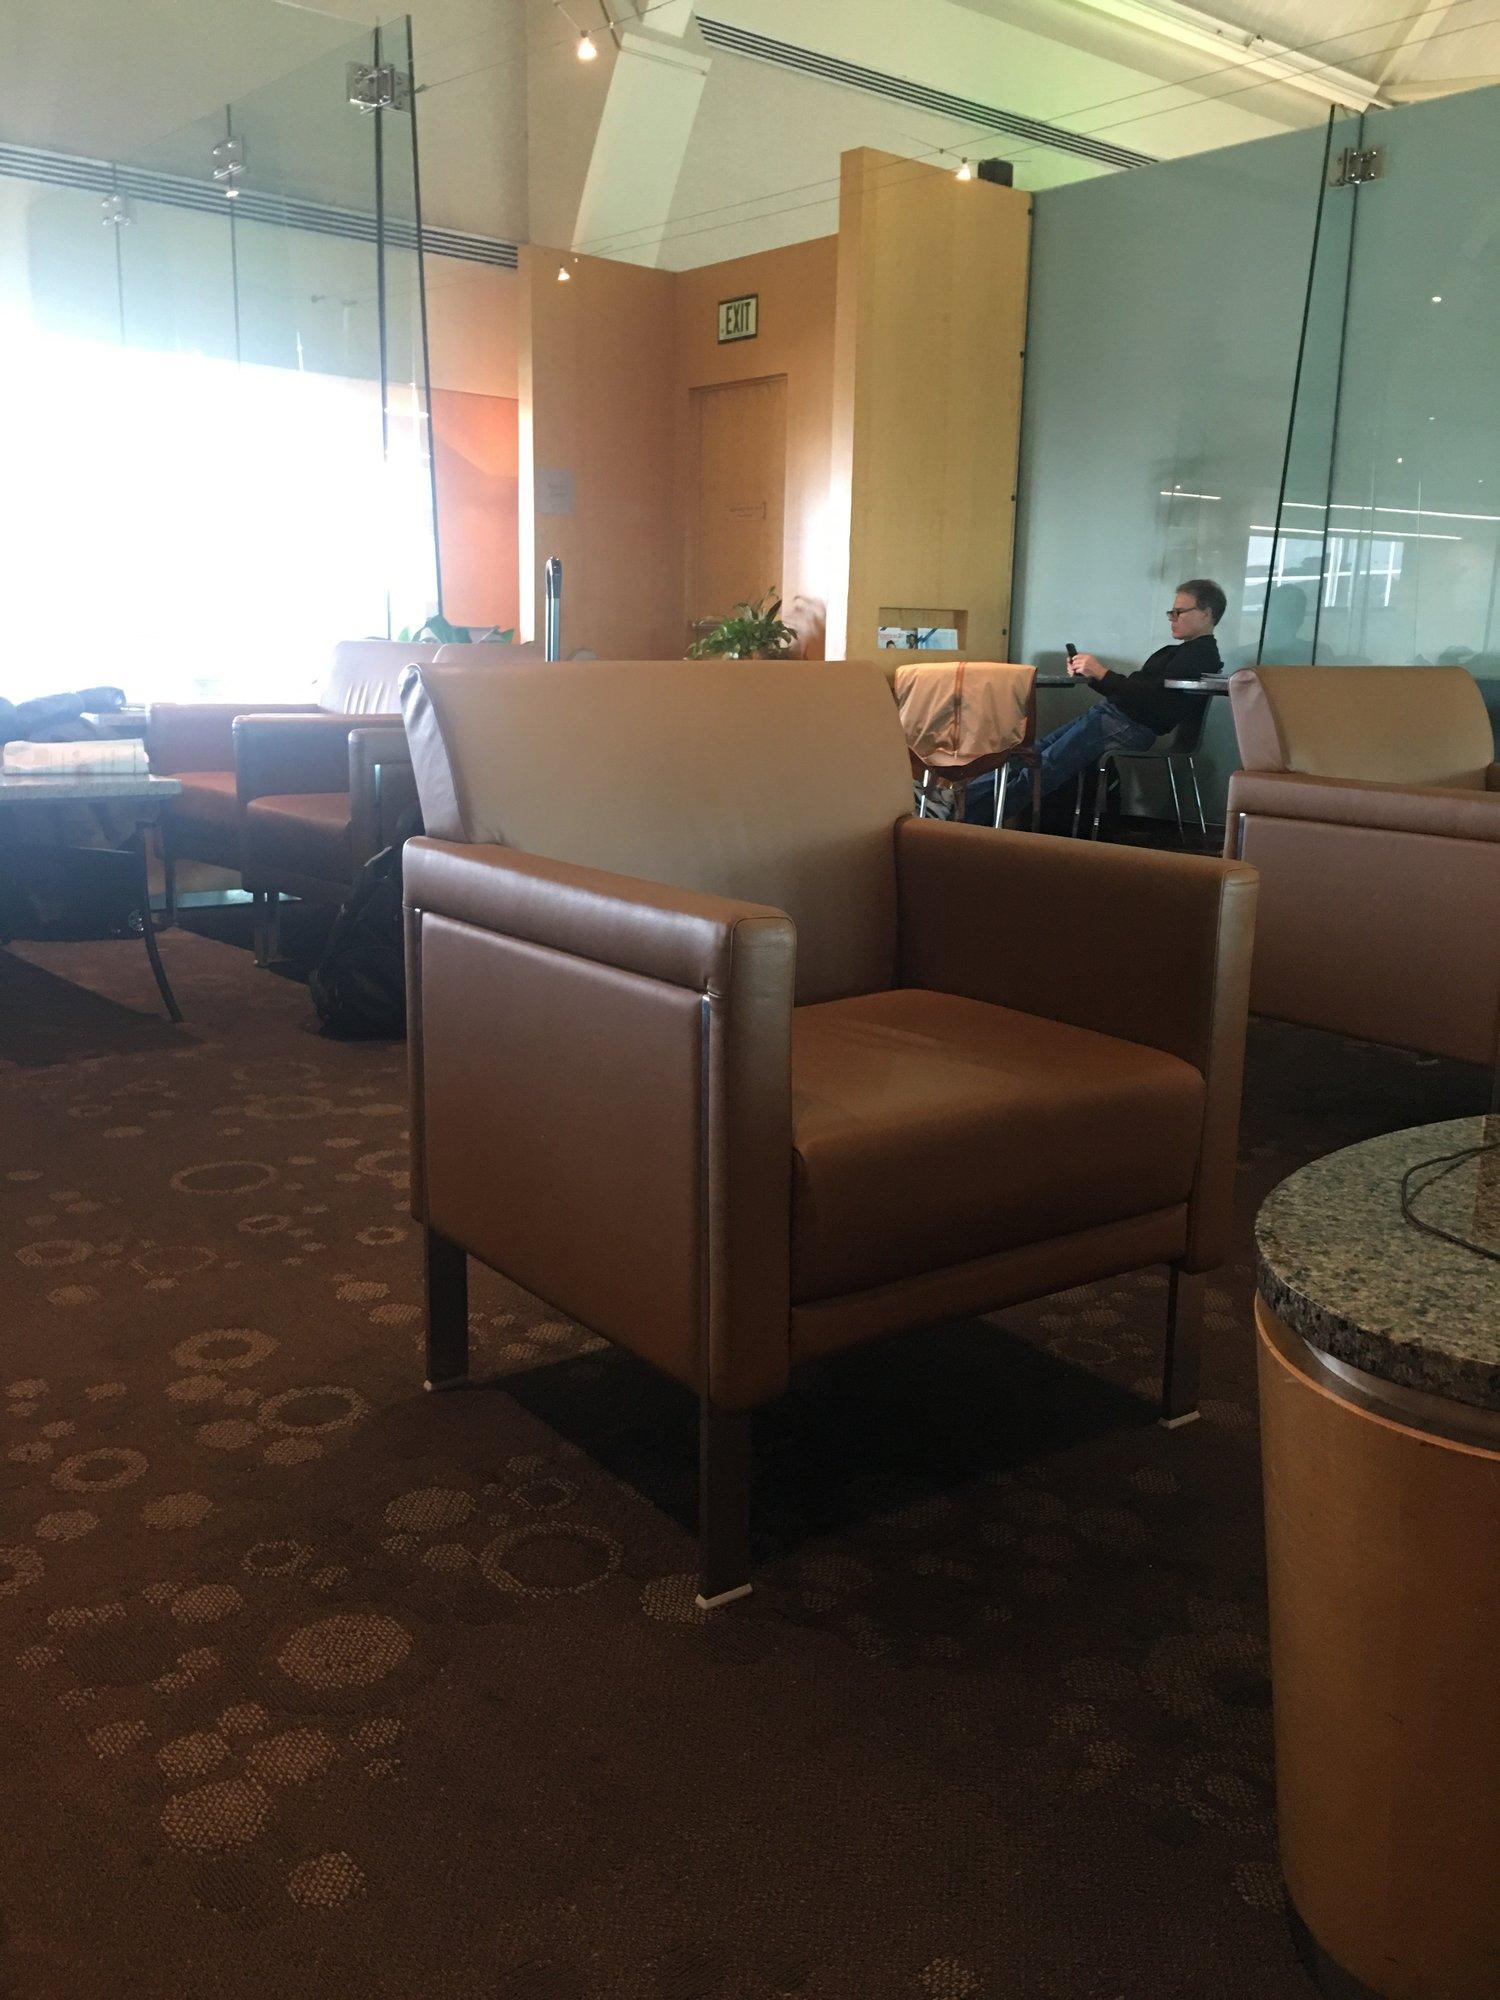 American Airlines Admirals Club image 6 of 12